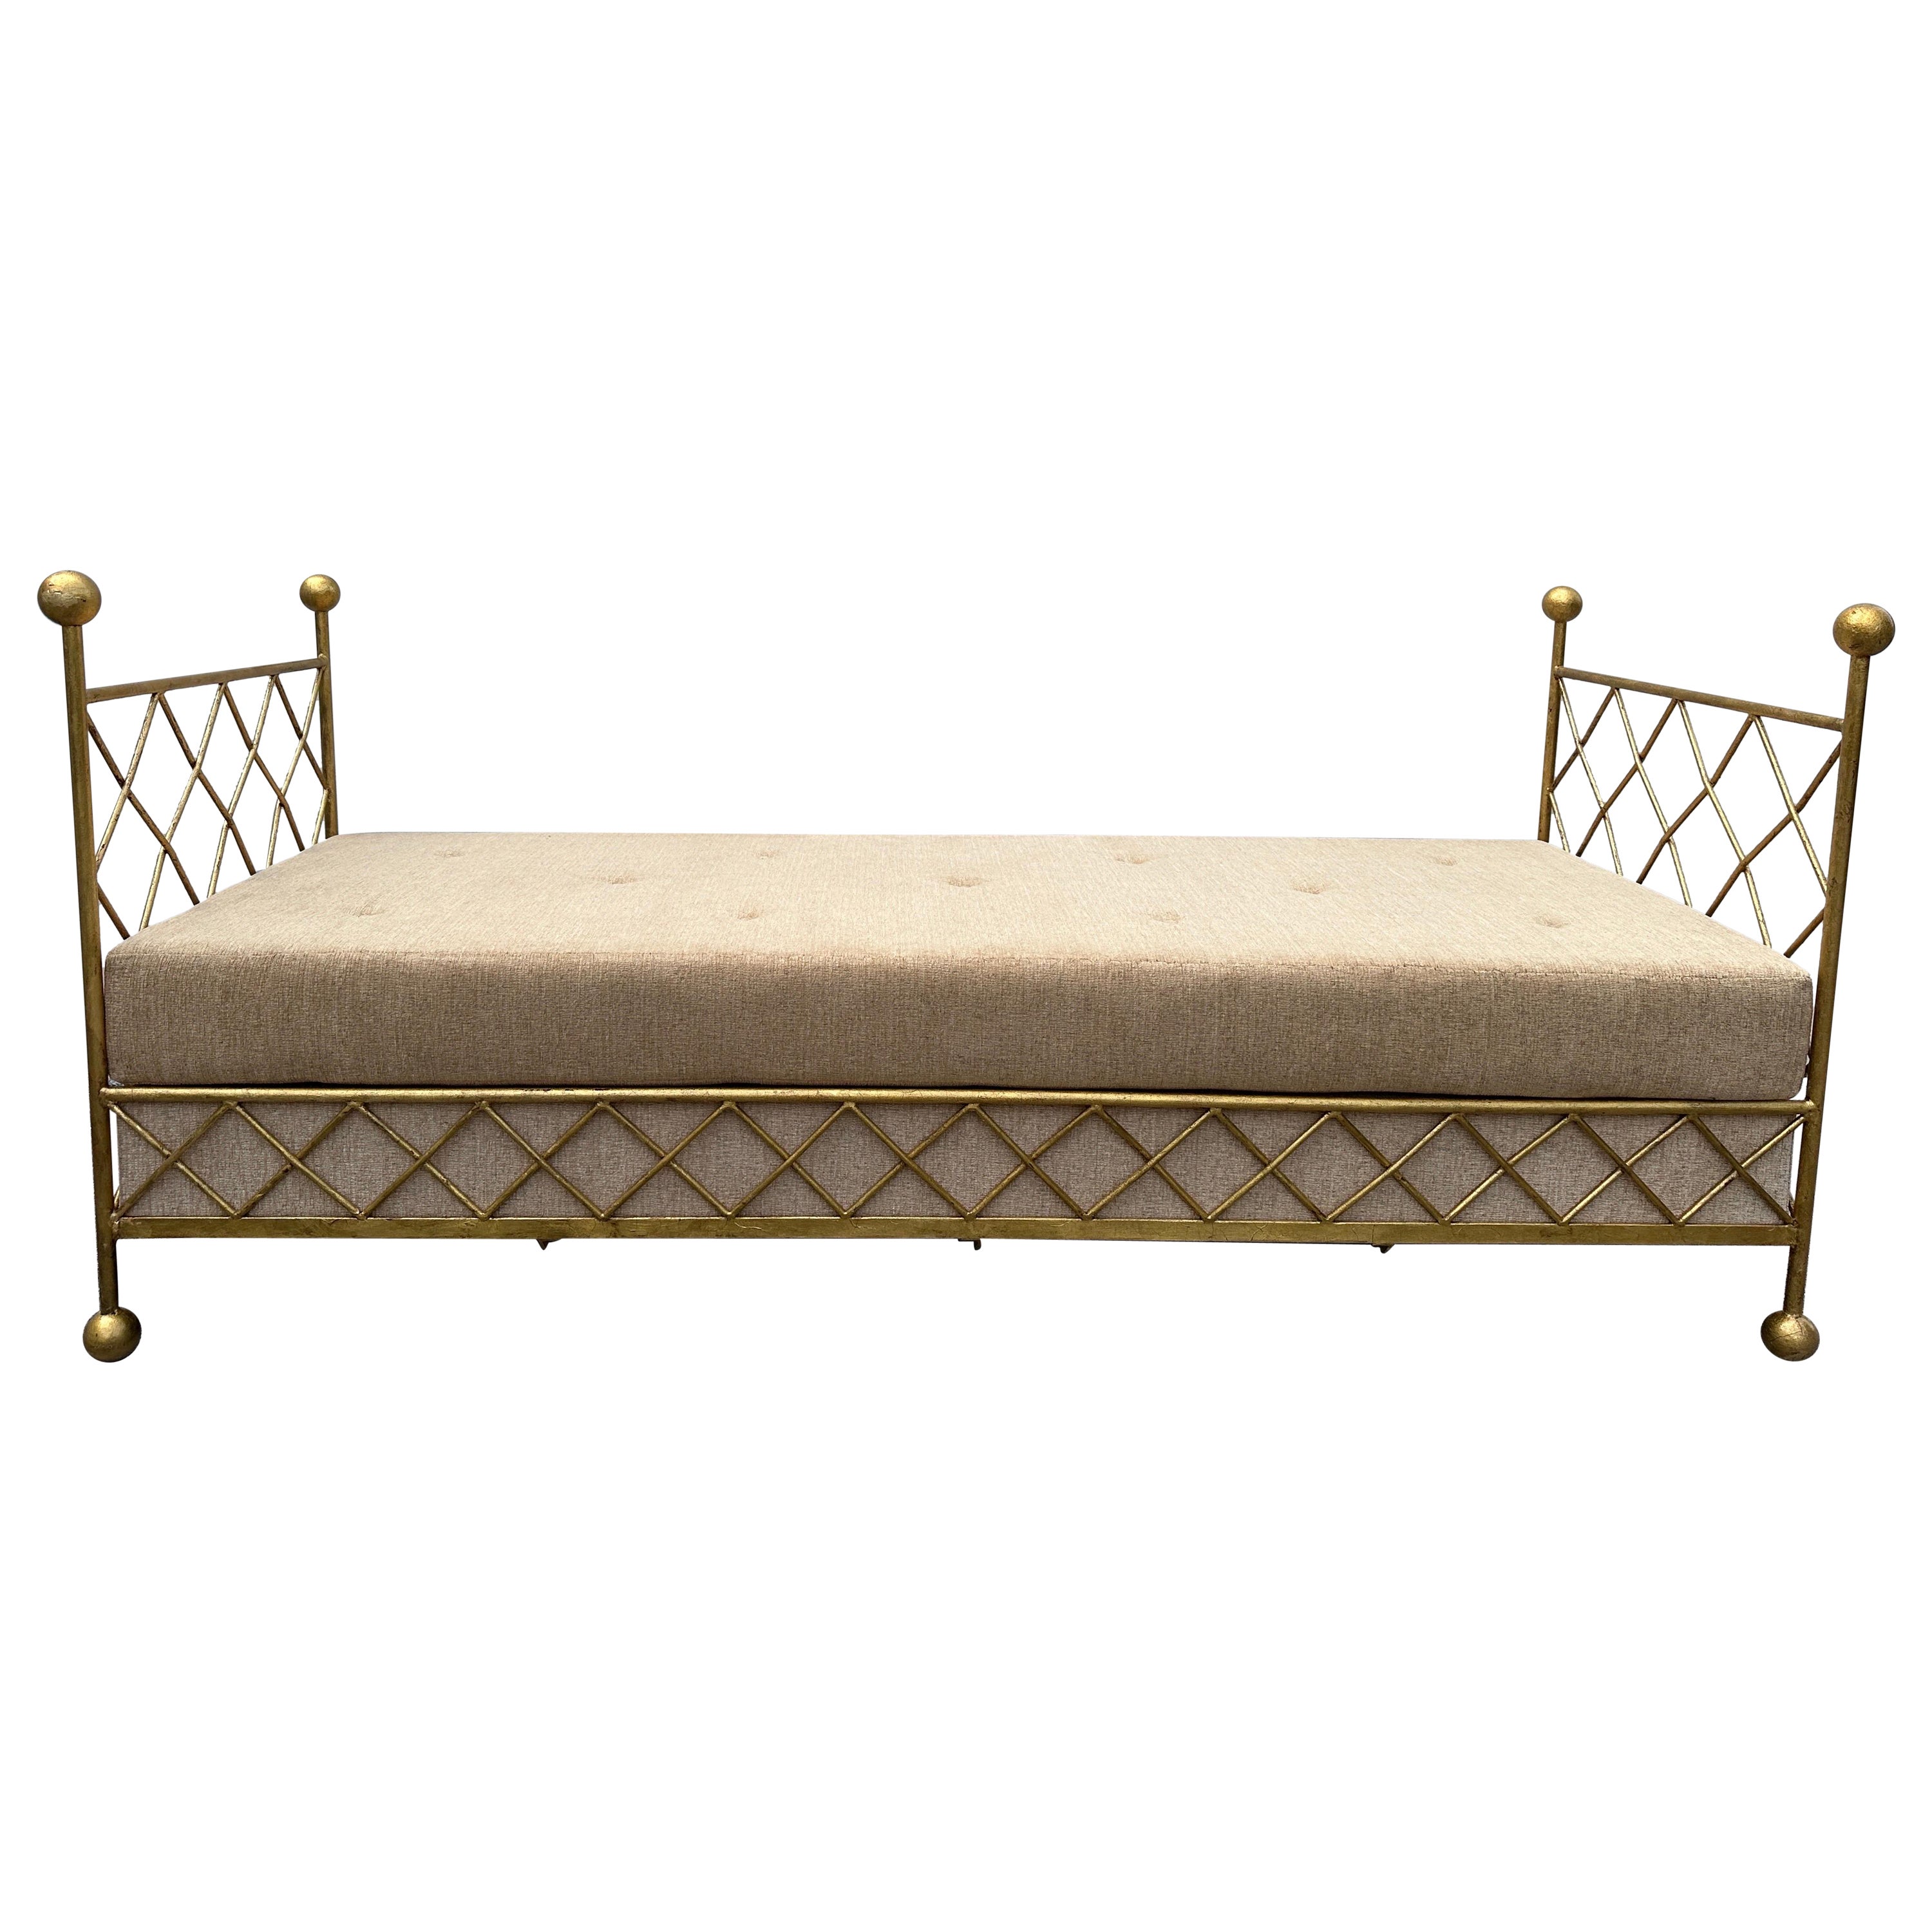 1980's French Gilt Iron Daybed - Newly Upholstered For Sale